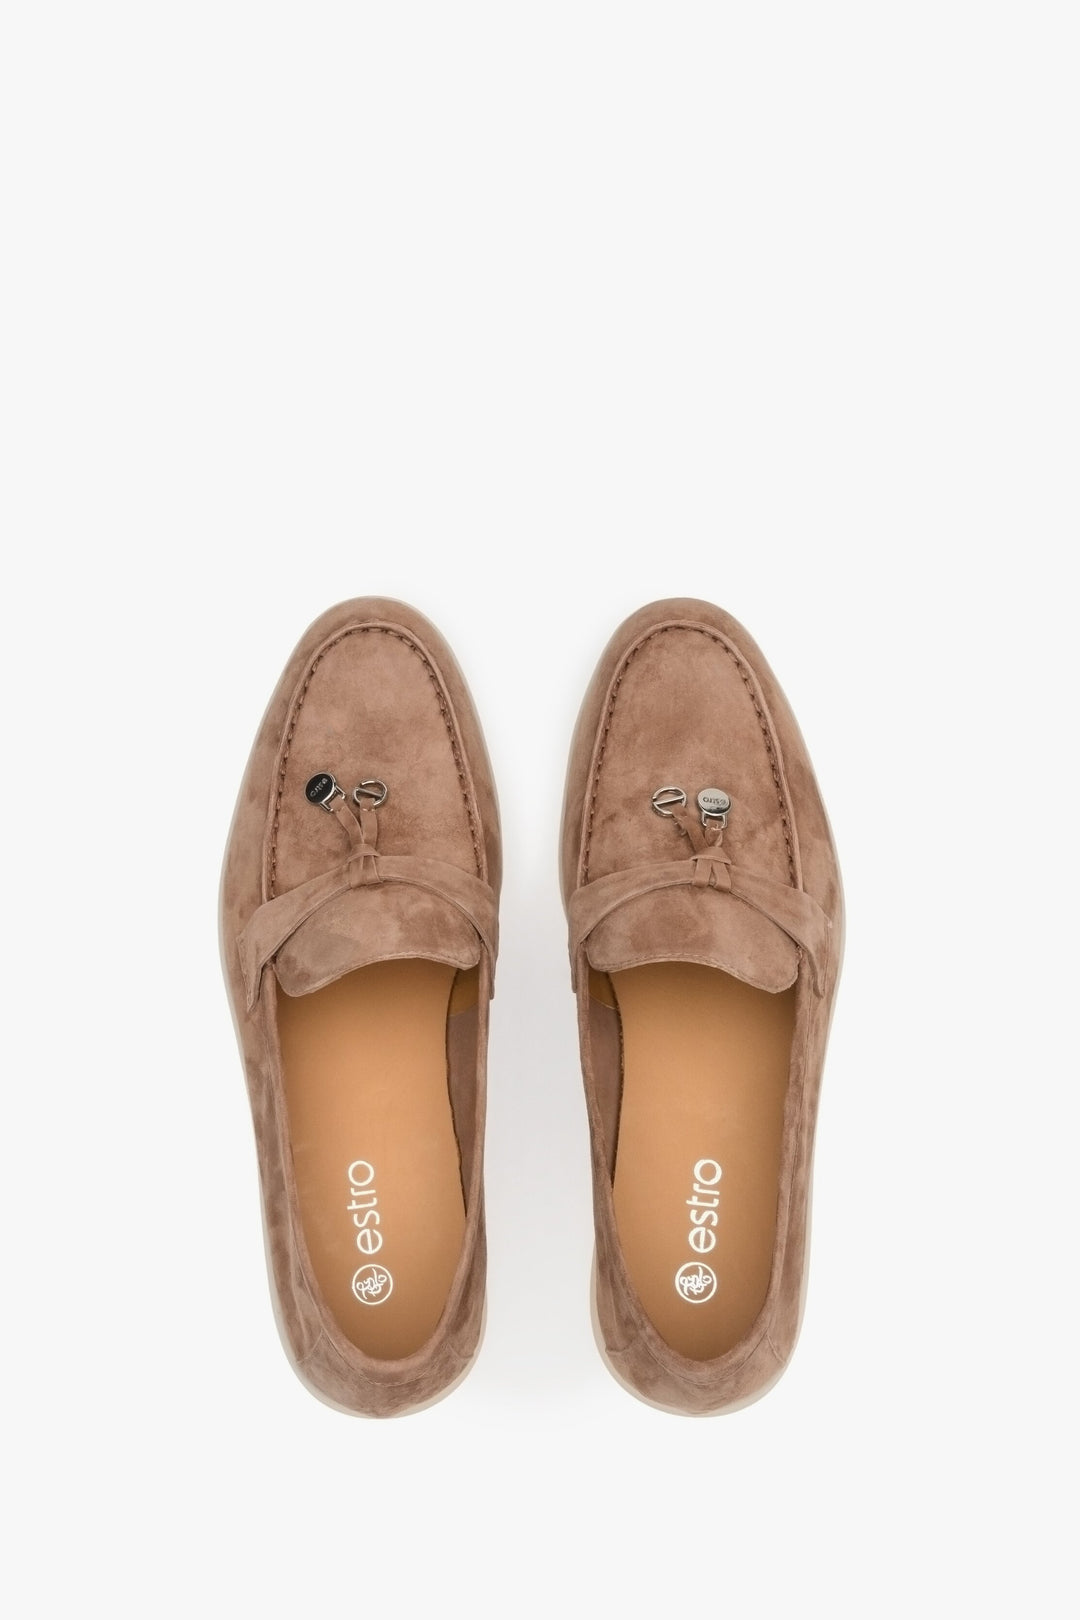 Brown women's loafers of Estro brand made of velour and leather - presentation of the footwear from above.